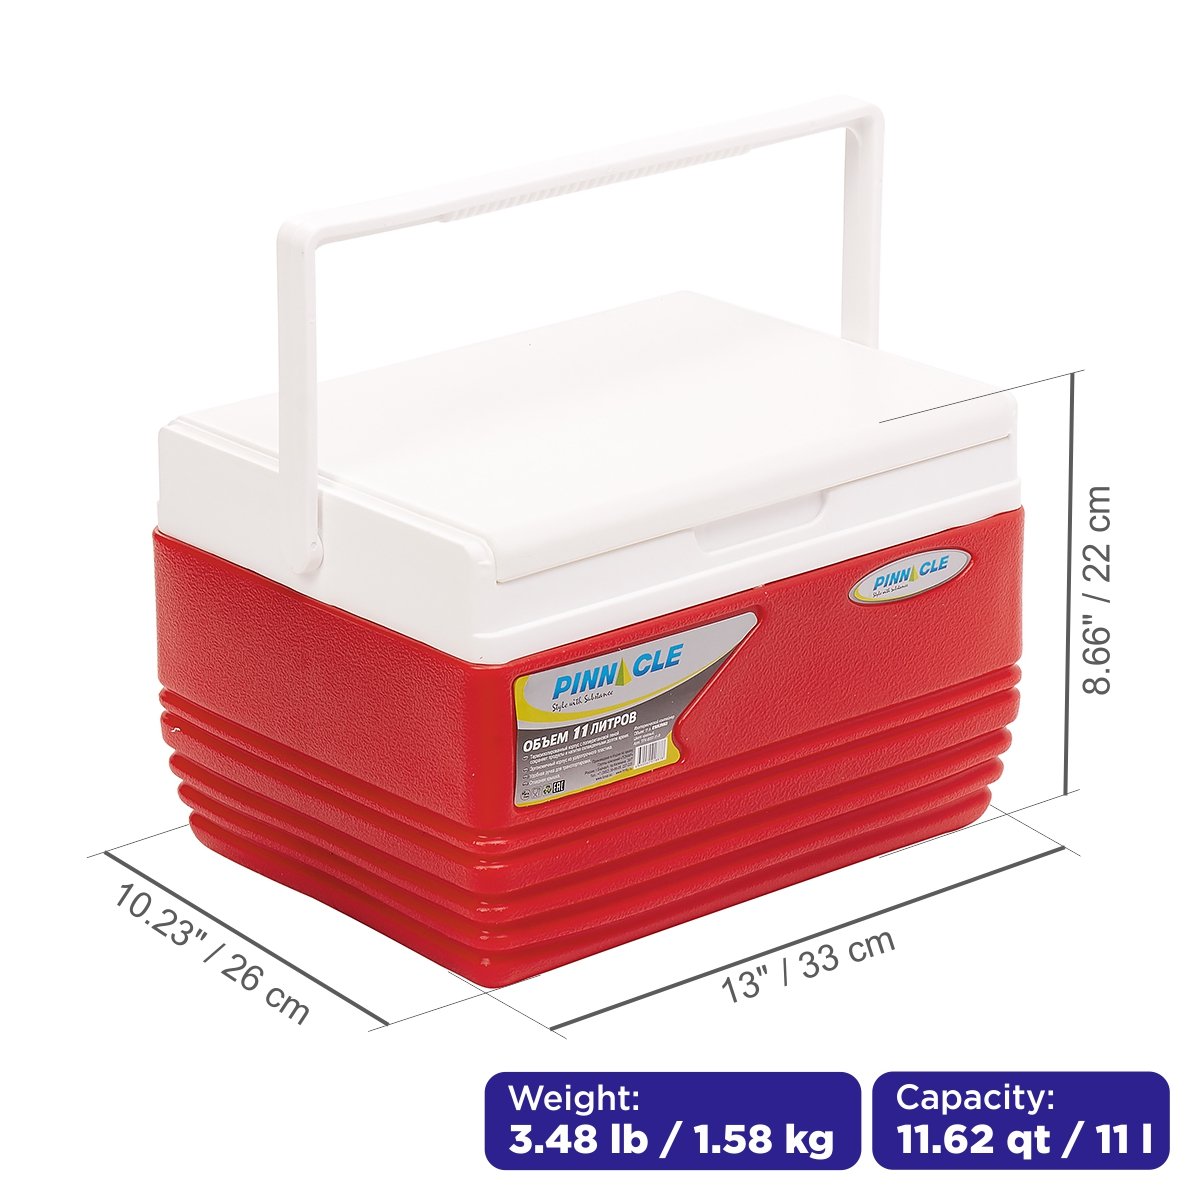 Eskimo Portable Hard-Sided Ice Chest for Camping, 11 qt, Red is 13 inches long, 10.2 inches wide and 8.7 inches high, weighing 3.5 lbs